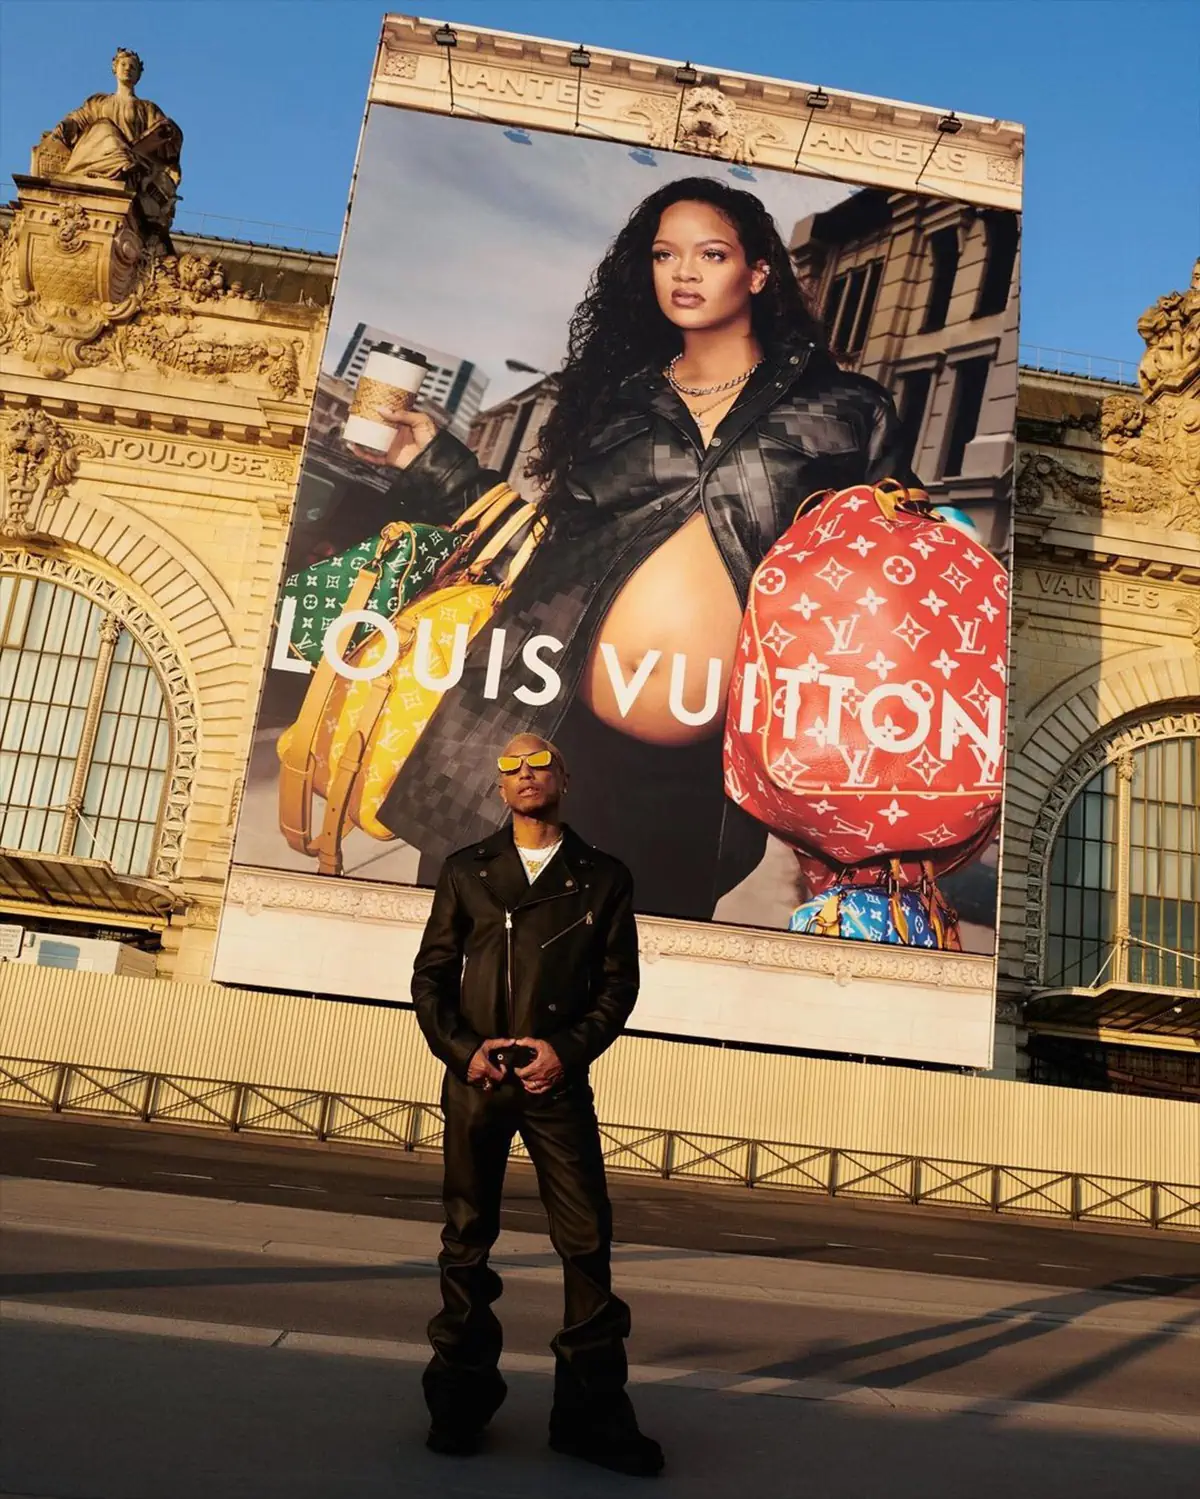 Rihanna stars in Pharrell's debut campaign for Louis Vuitton